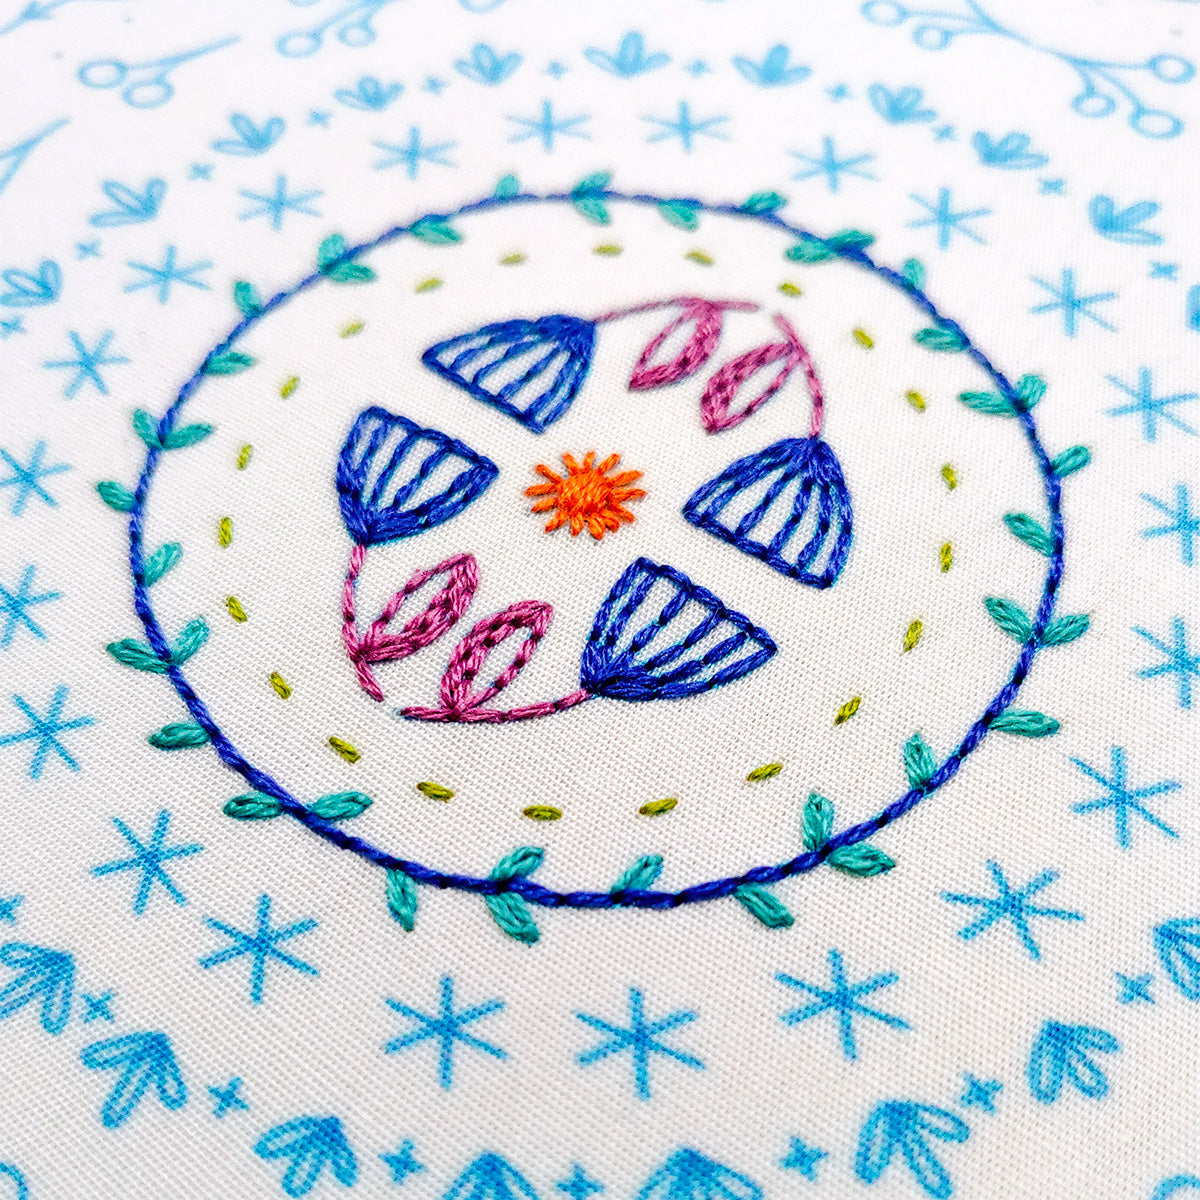 Stitches in the Round Hand Embroidery Kit - Stitched Modern